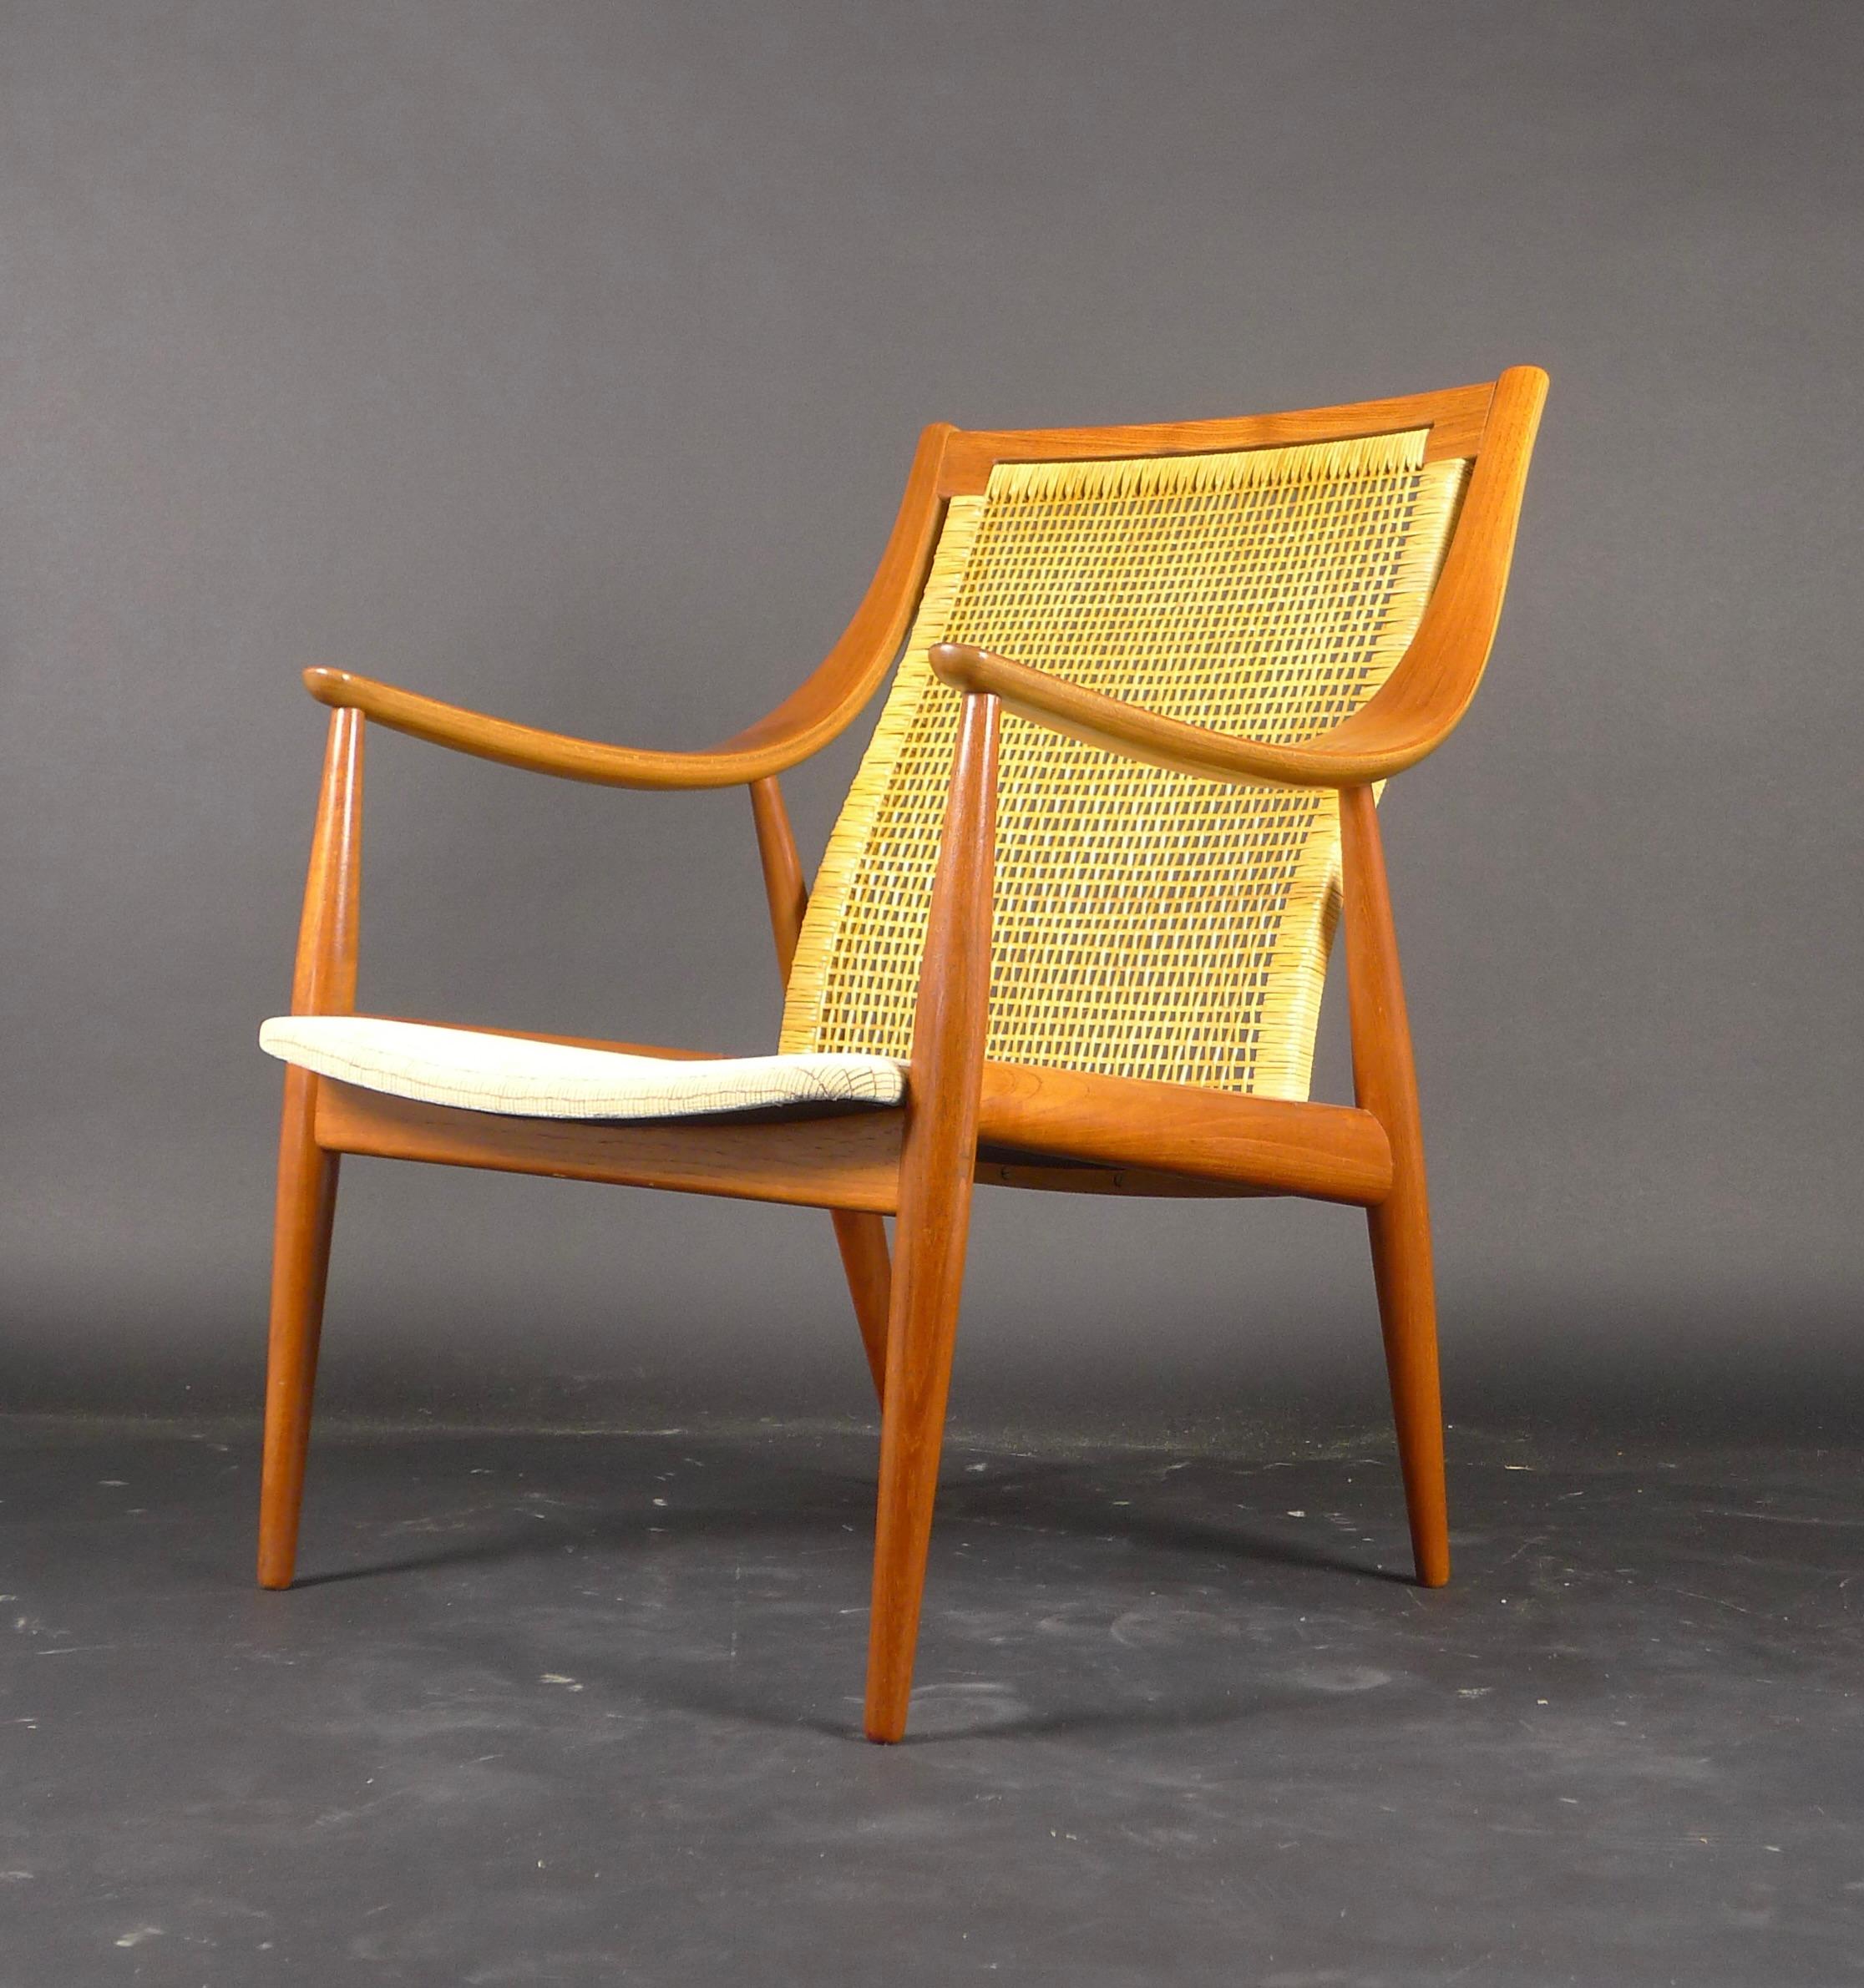 Peter Hvidt & Orla Mølgaard-Nielsen, Model 146 Easy Chair, France & Son, 1950s

Teak frame with cane back panel, upholstered drop-in seat, France & Son label

Condition very good, with new upholstery.